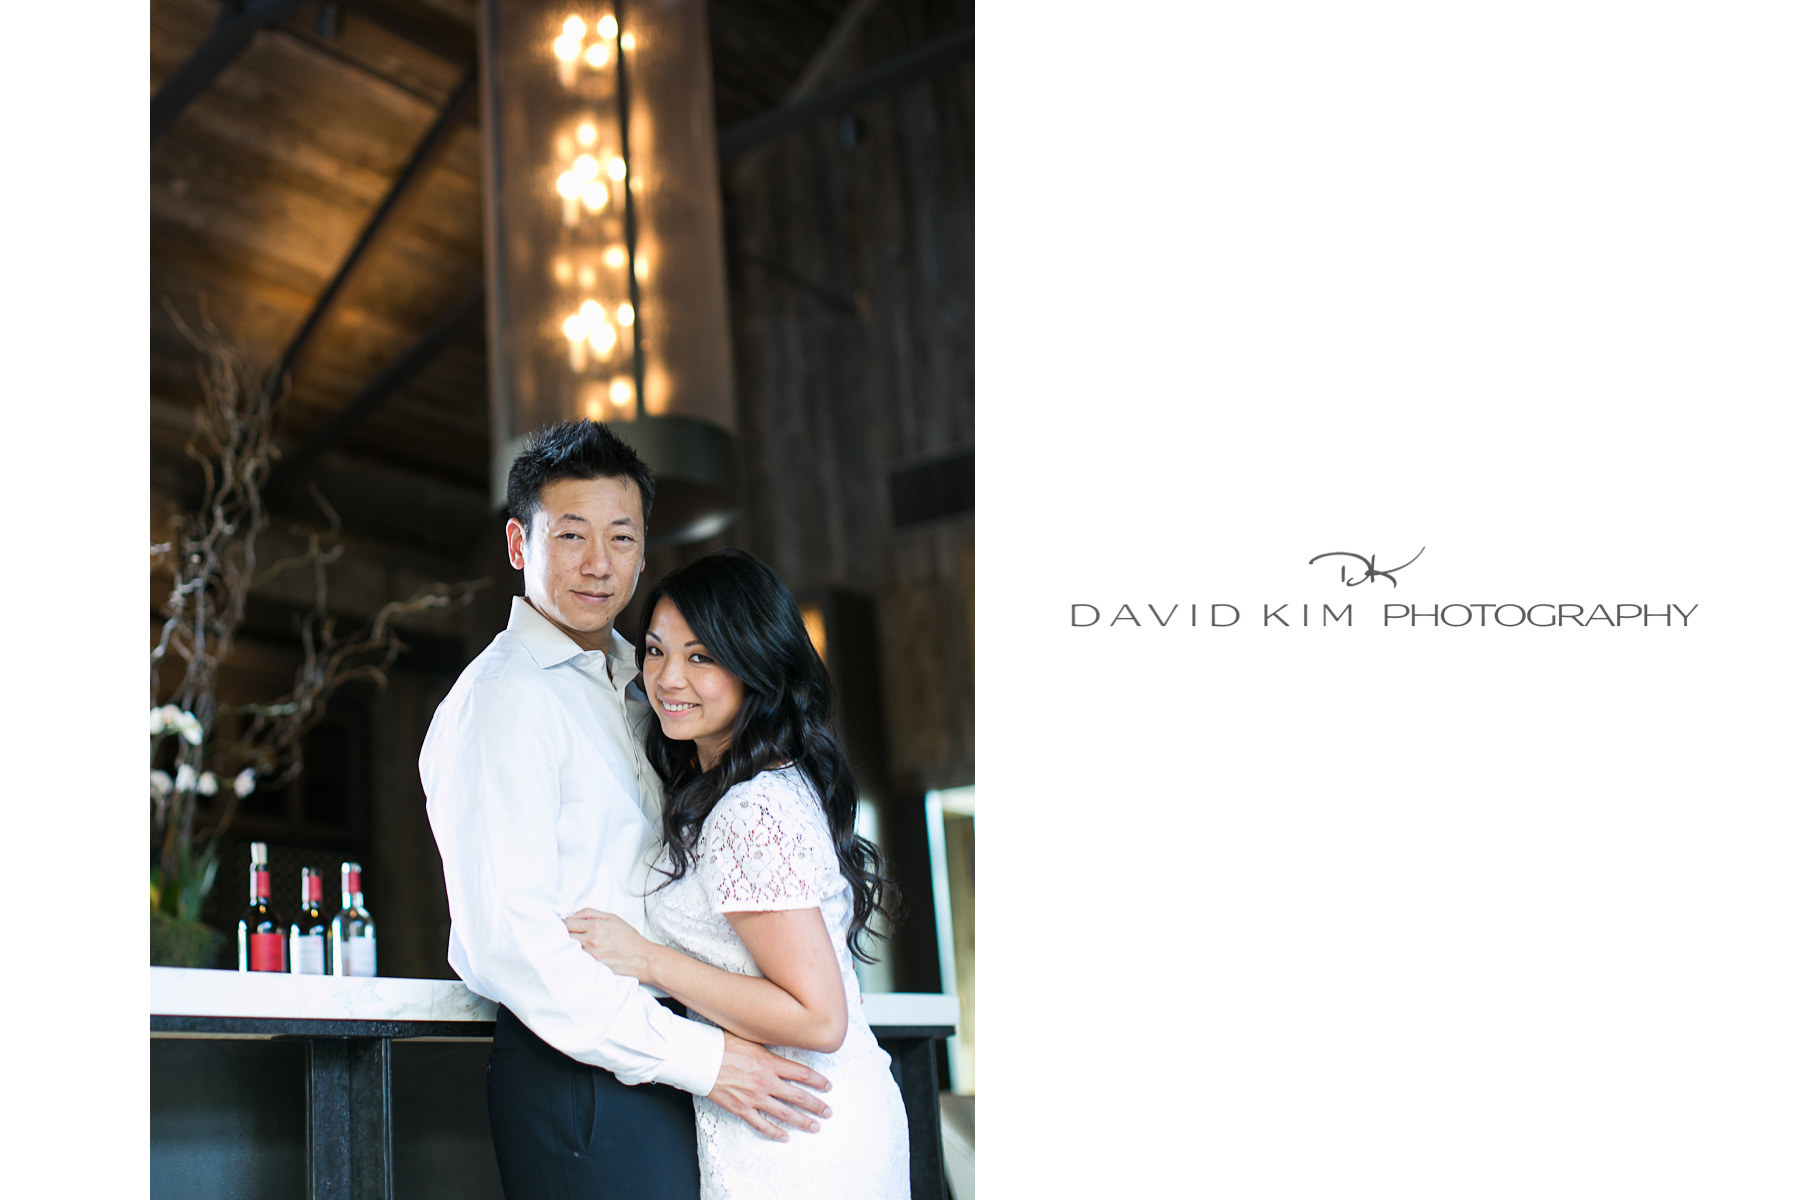 Ronnie-Vic-007-7-rams-gate-winery-engagement-session-david-kim-photography.jpg